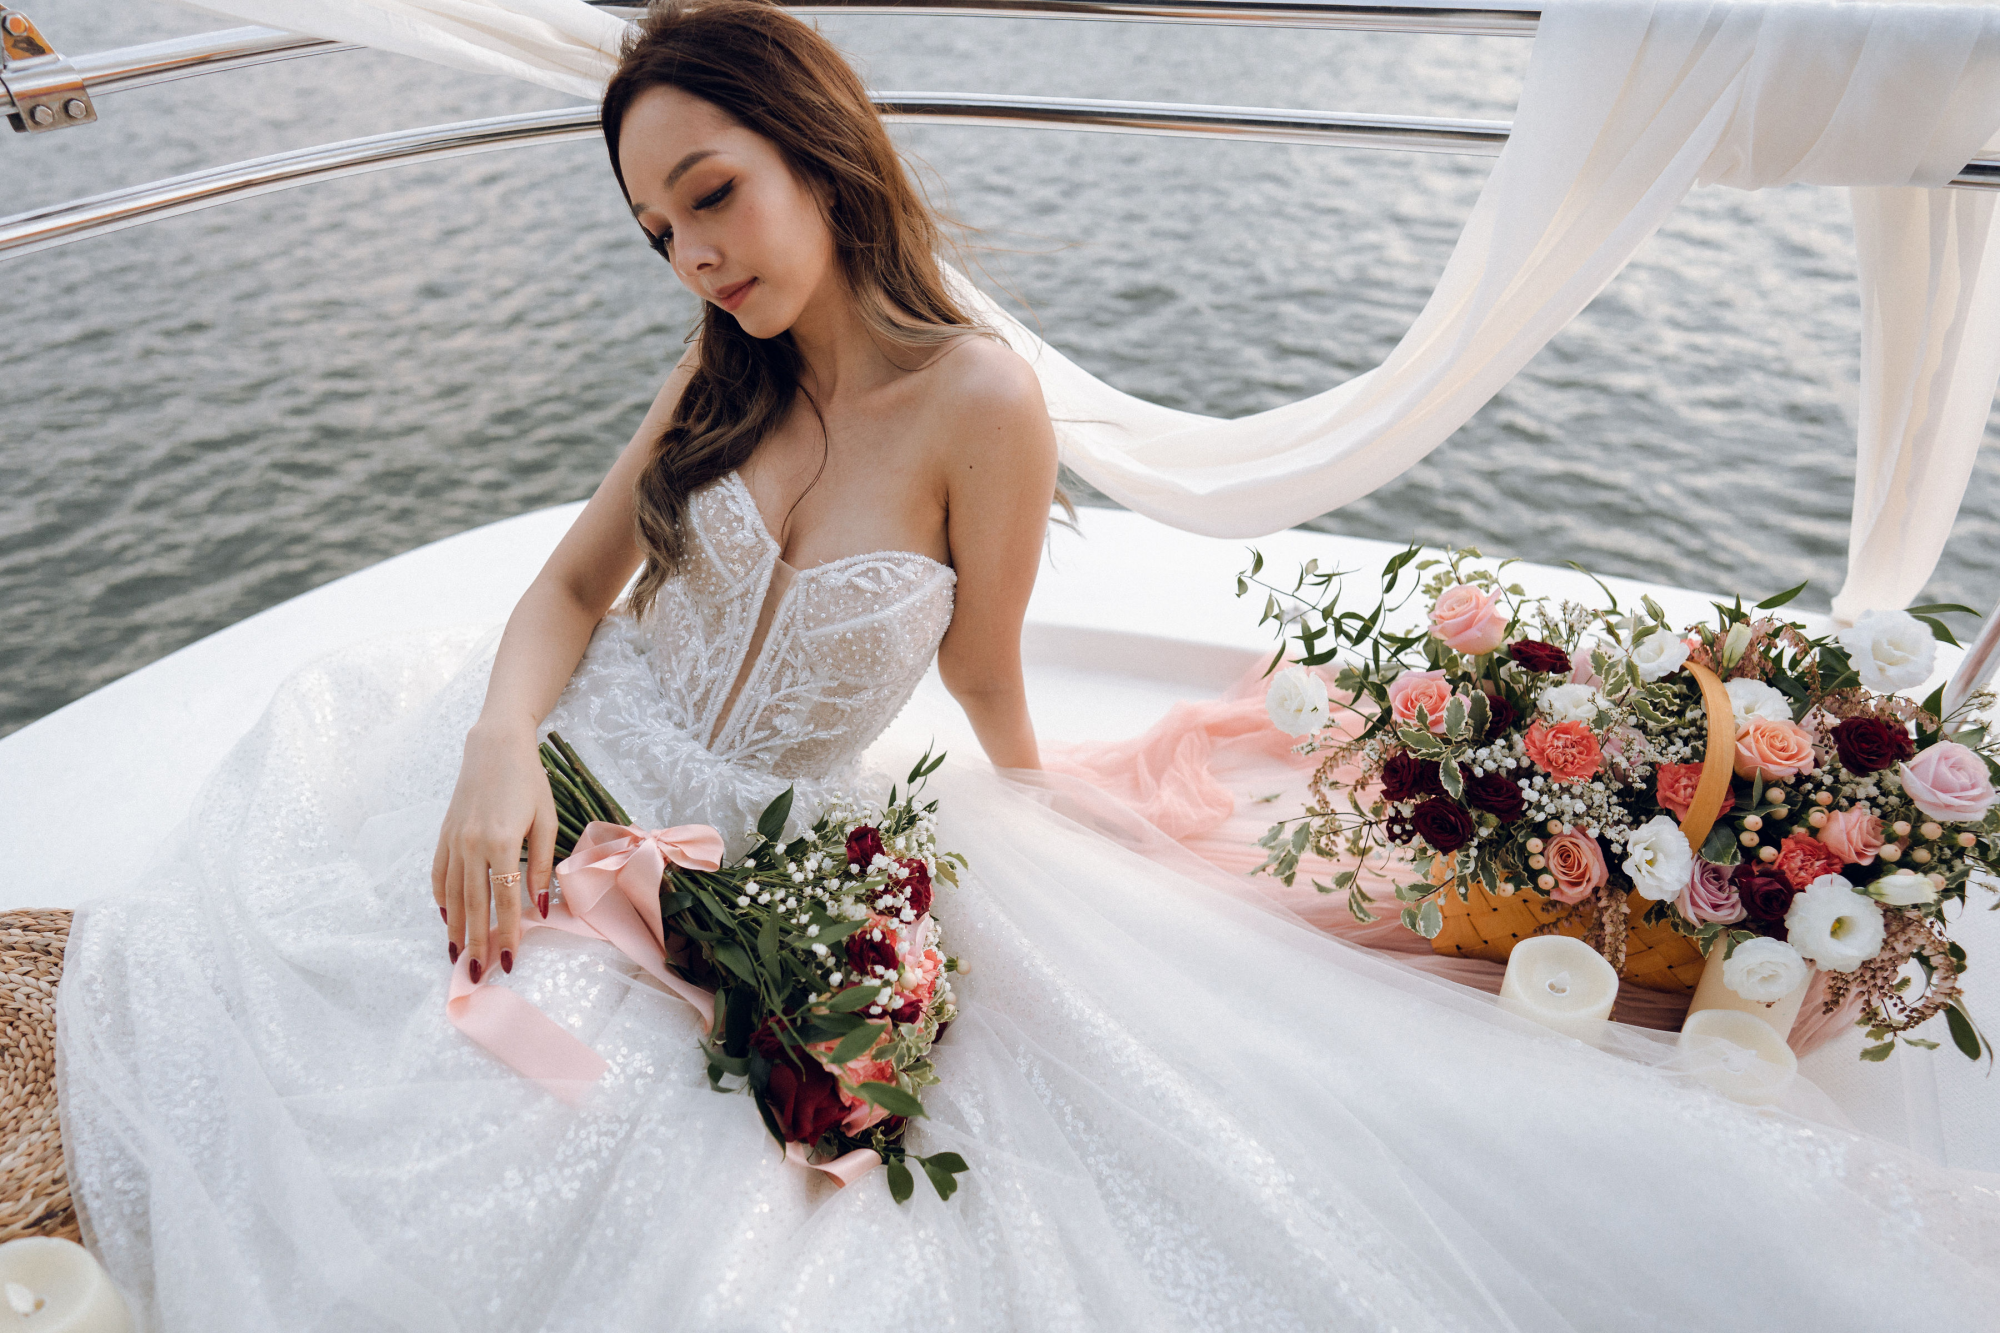 Sunset Prewedding Photoshoot On A Yacht With Romantic Floral Styling by Samantha on OneThreeOneFour 24